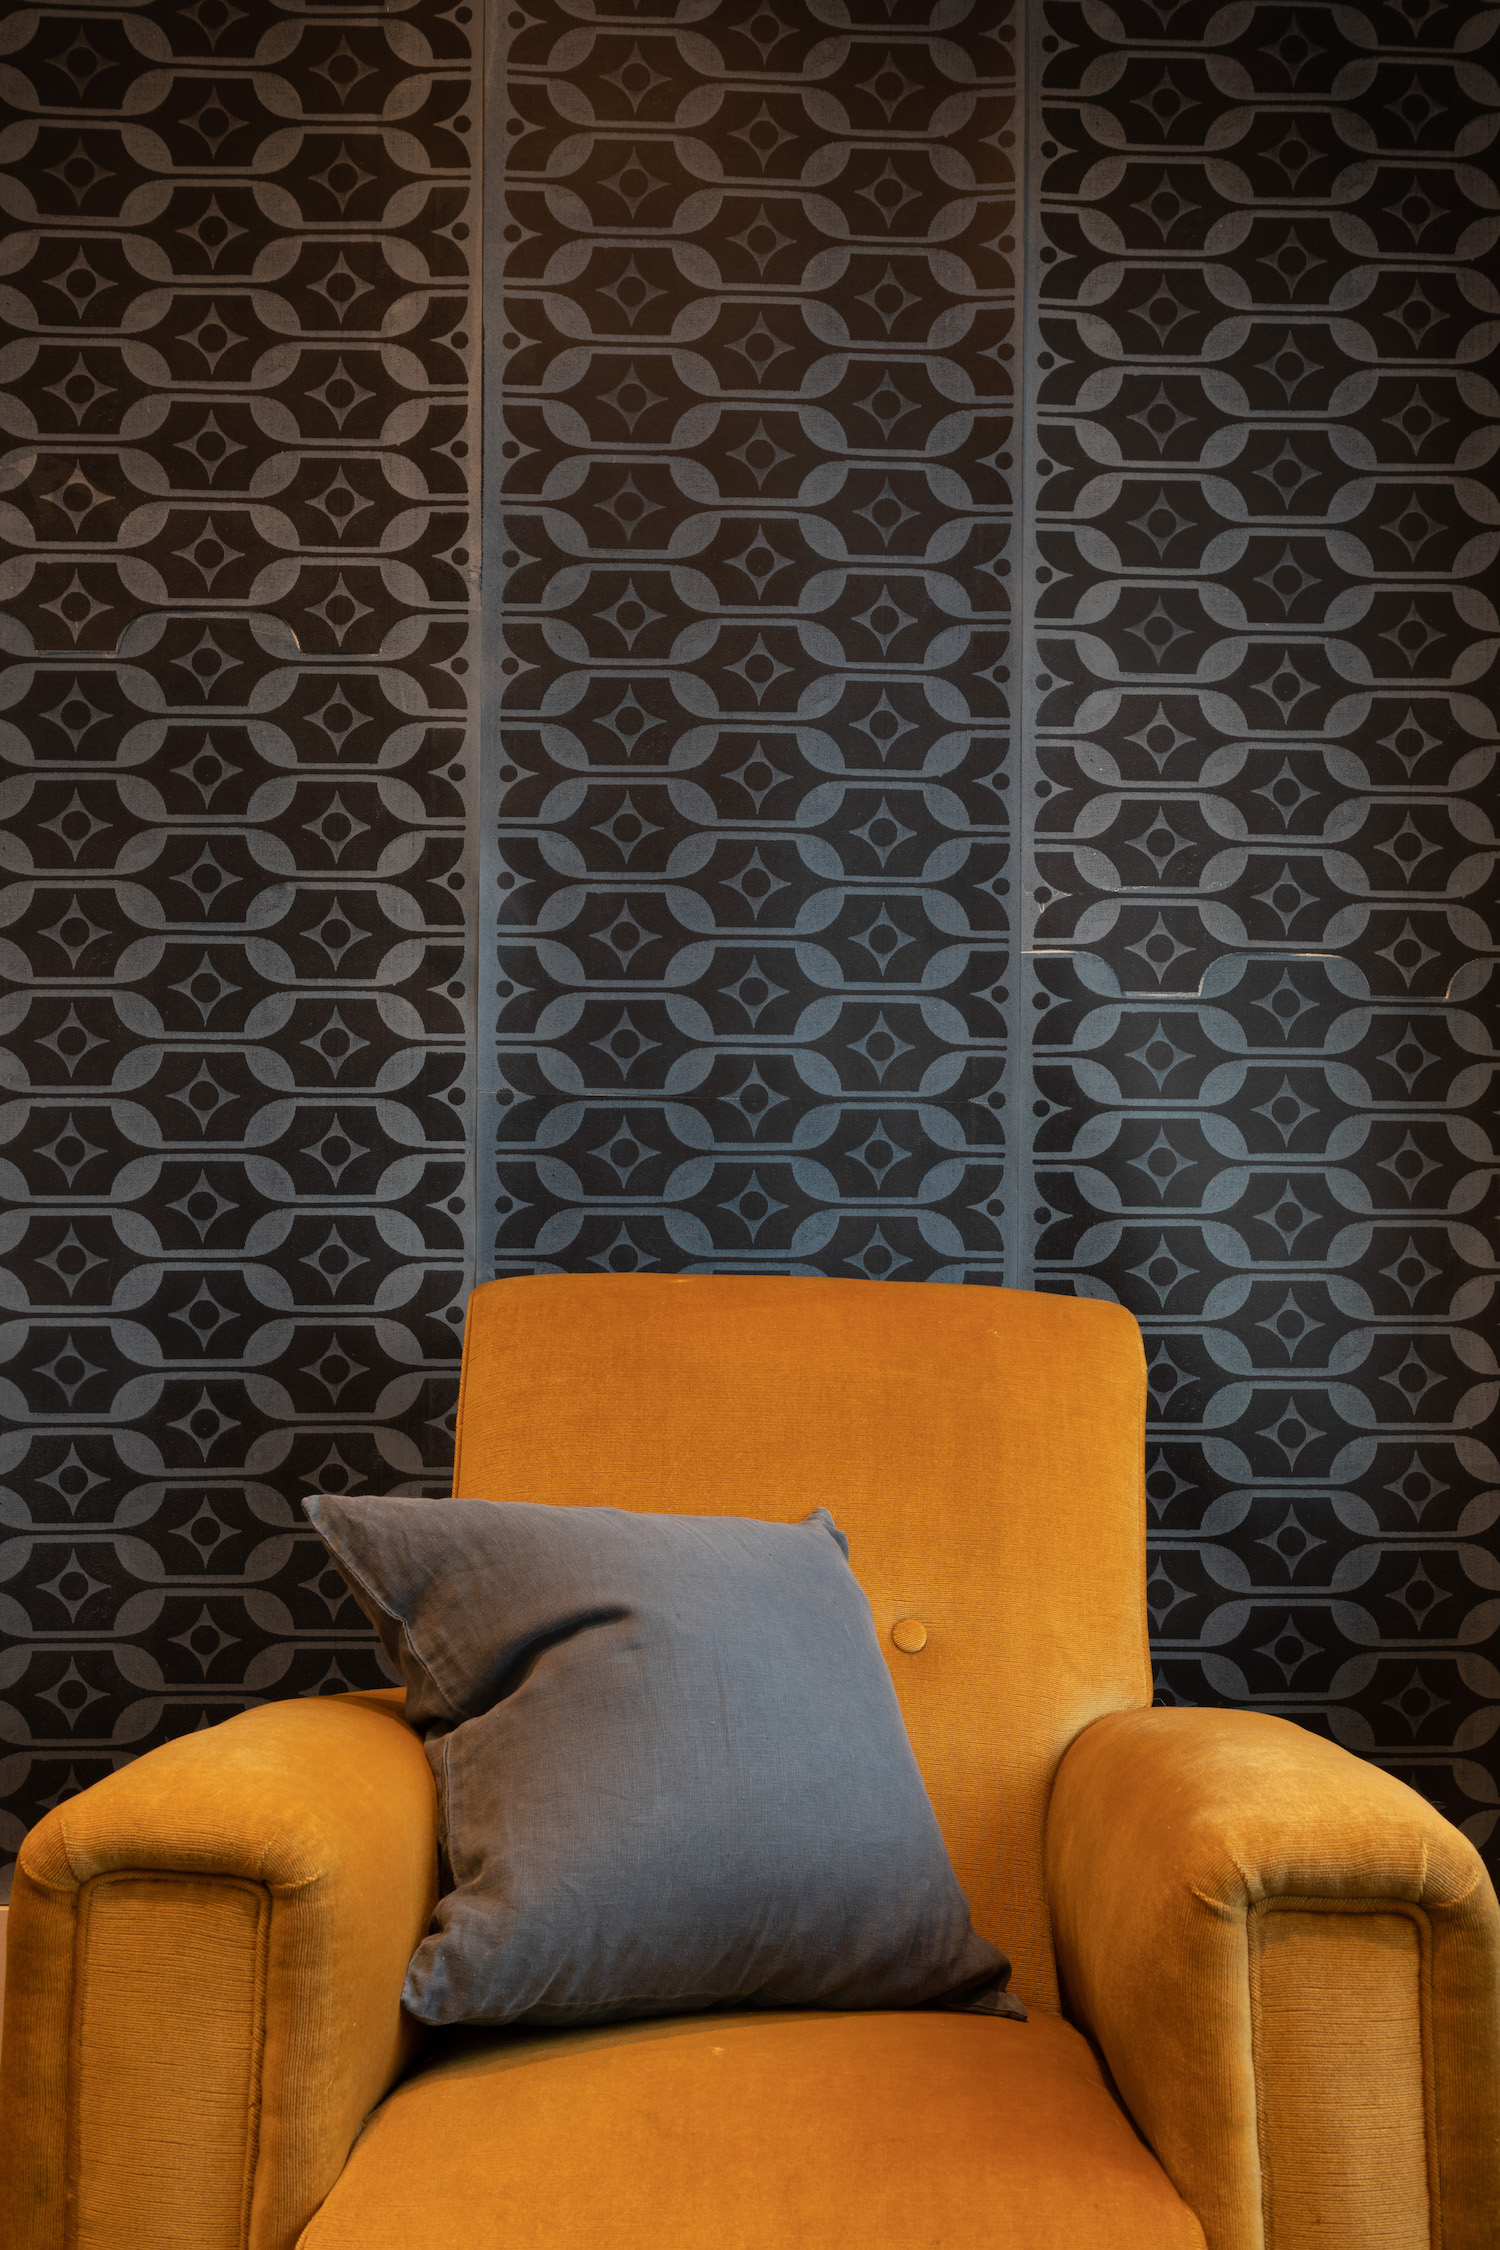 Hornsea's designs influenced this wallpaper by Deborah Bowness for Heirloom - Effect Magazine